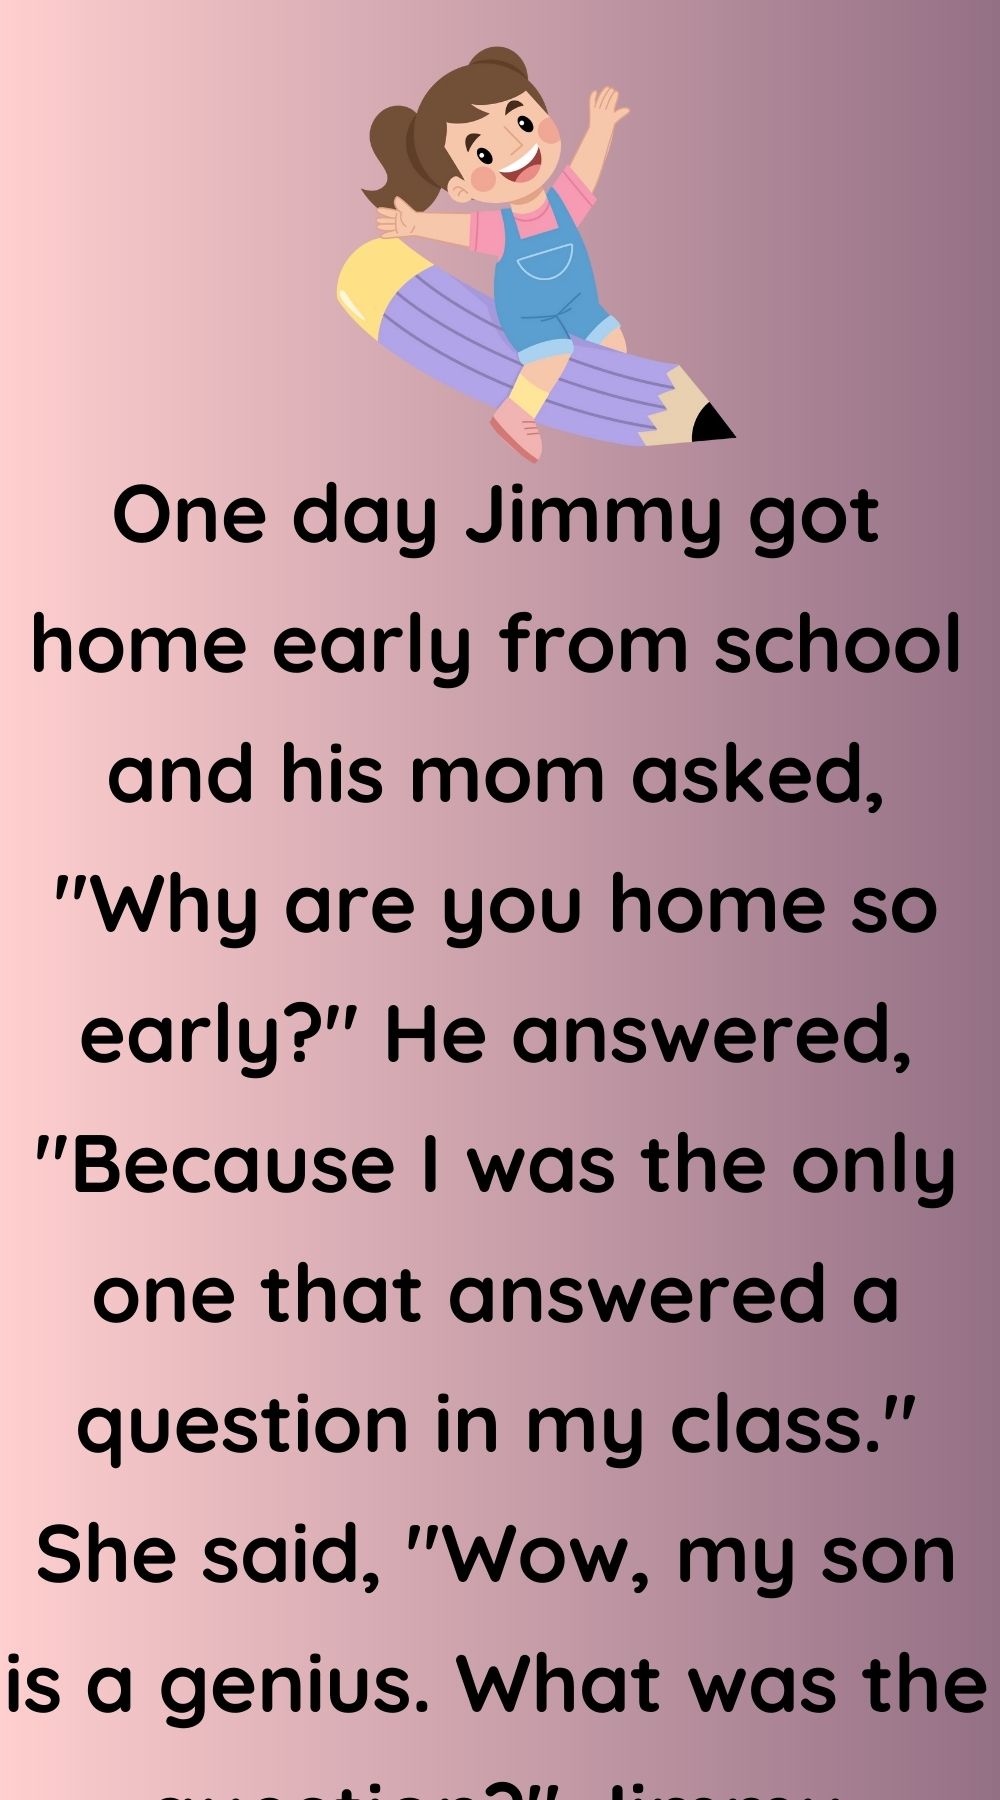 Jimmy got home early from school